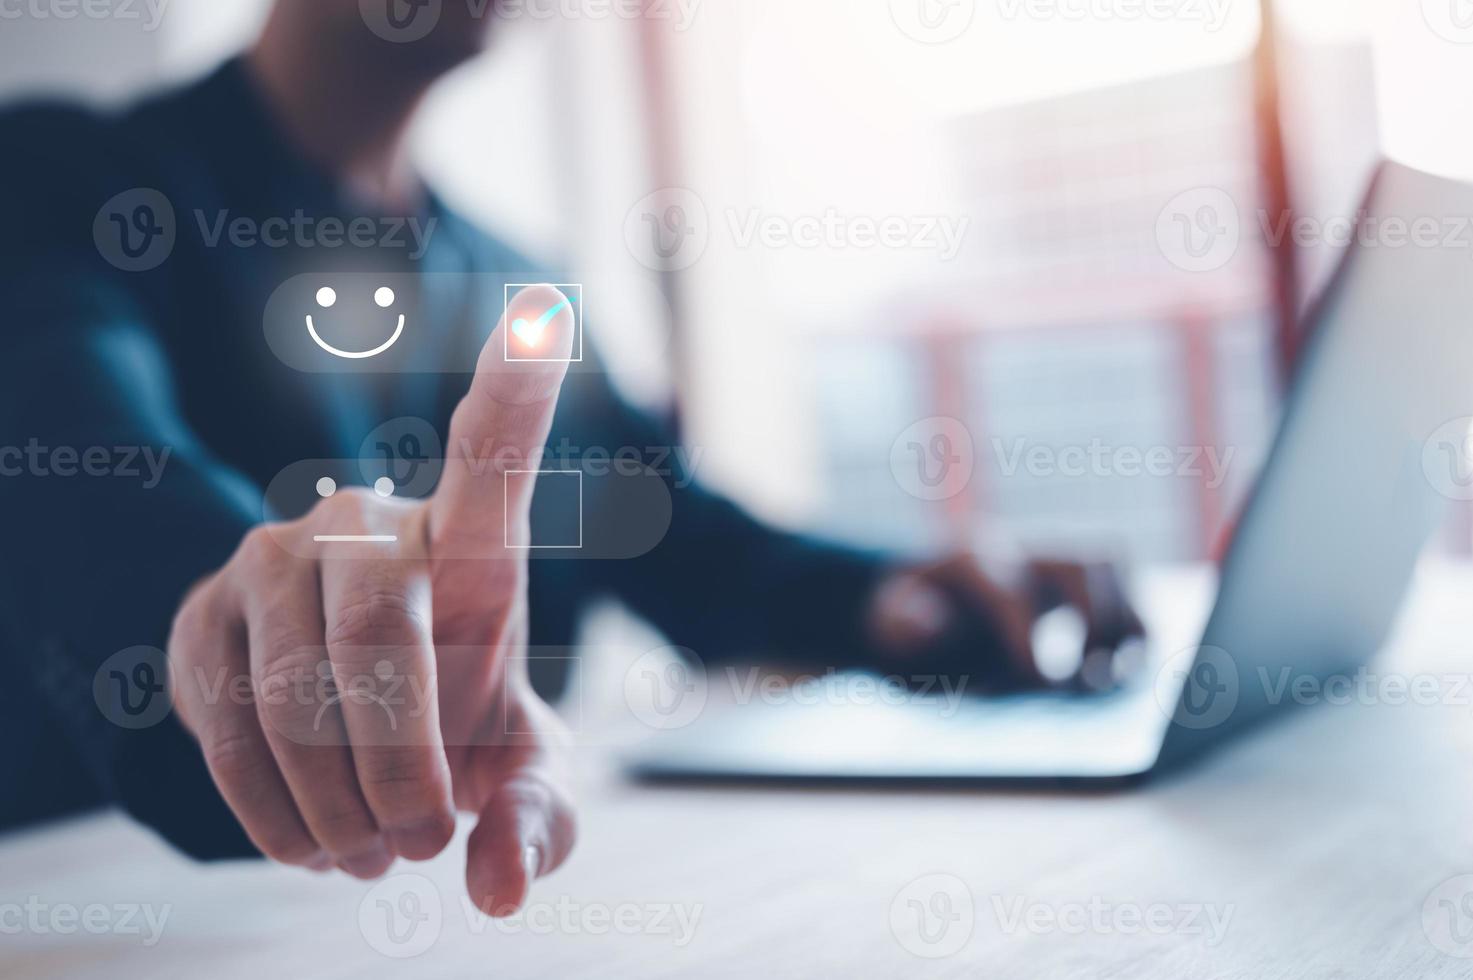 rating feedback and Customer service satisfaction survey concept.Business people or customers show satisfaction by pressing face emoticon smile in satisfaction on virtual touch screen. photo